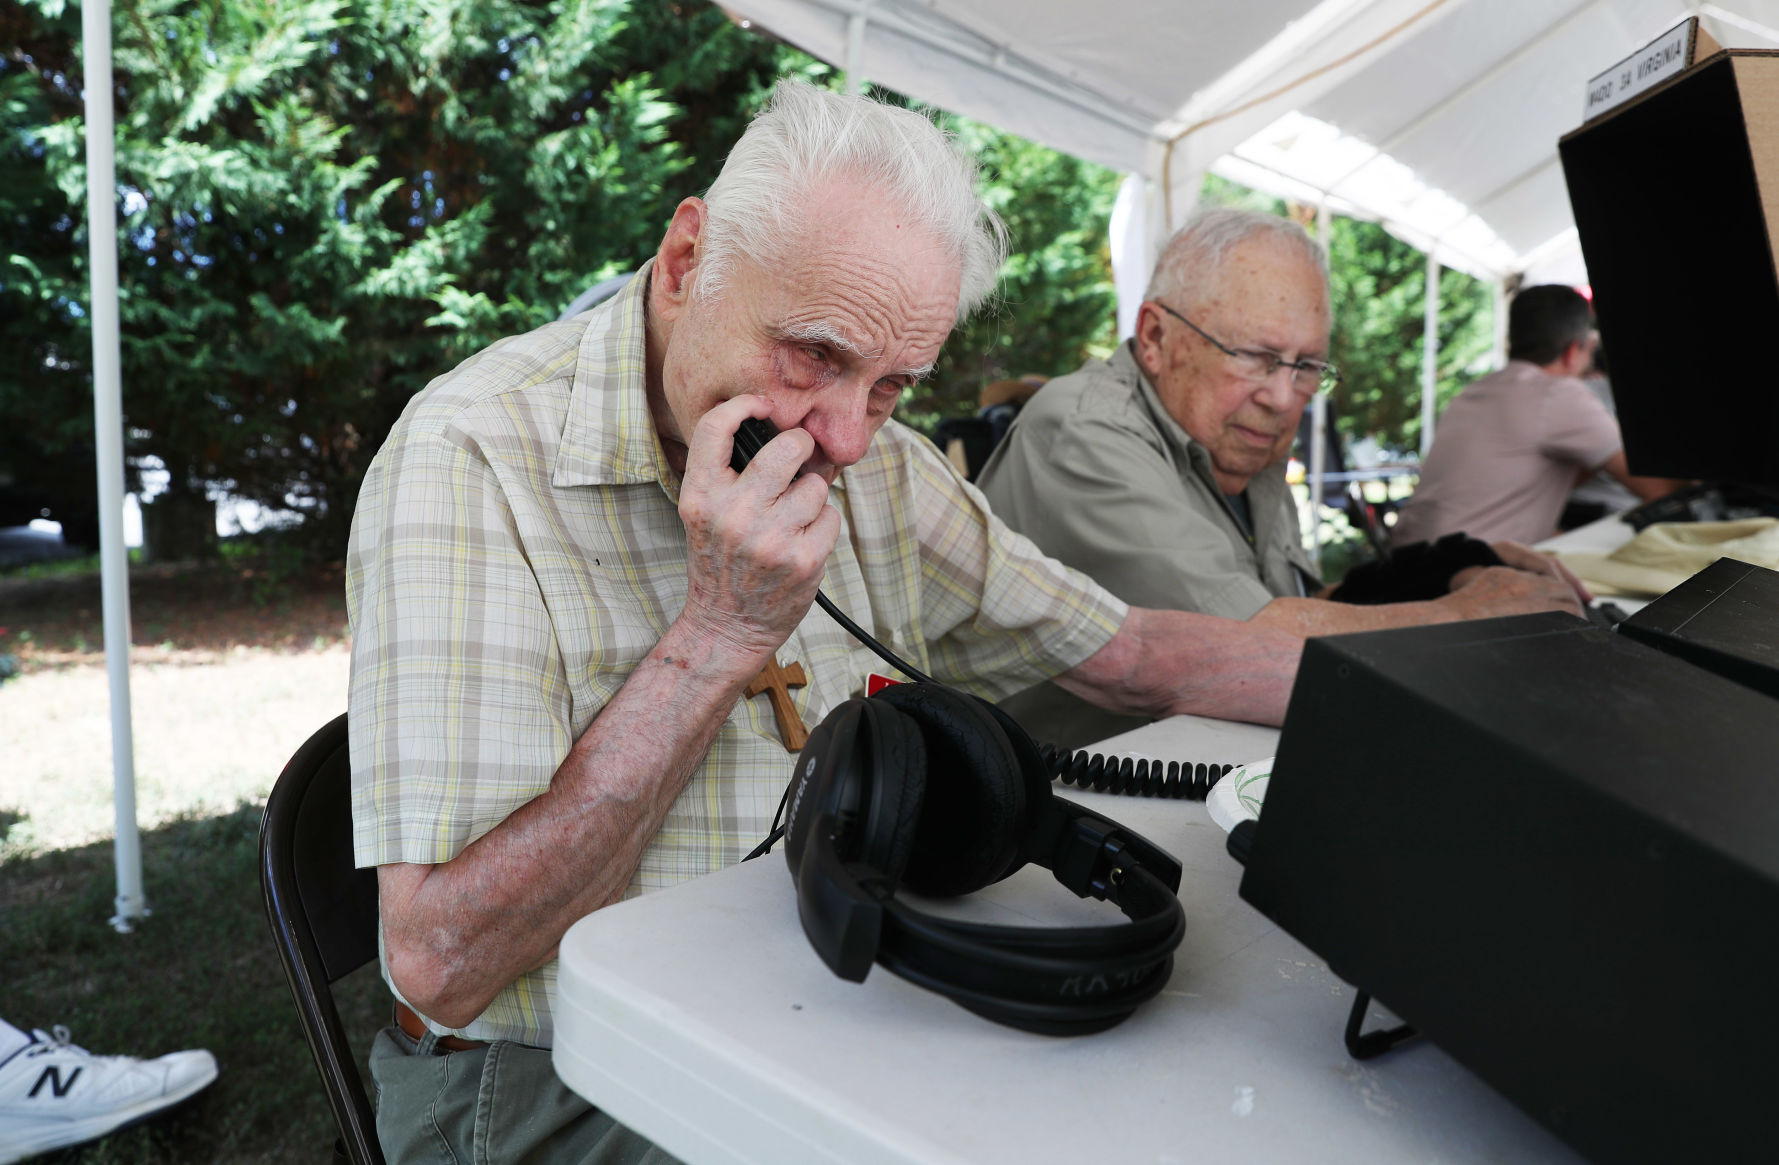 At field day, ham radio enthusiasts show off their magic picture